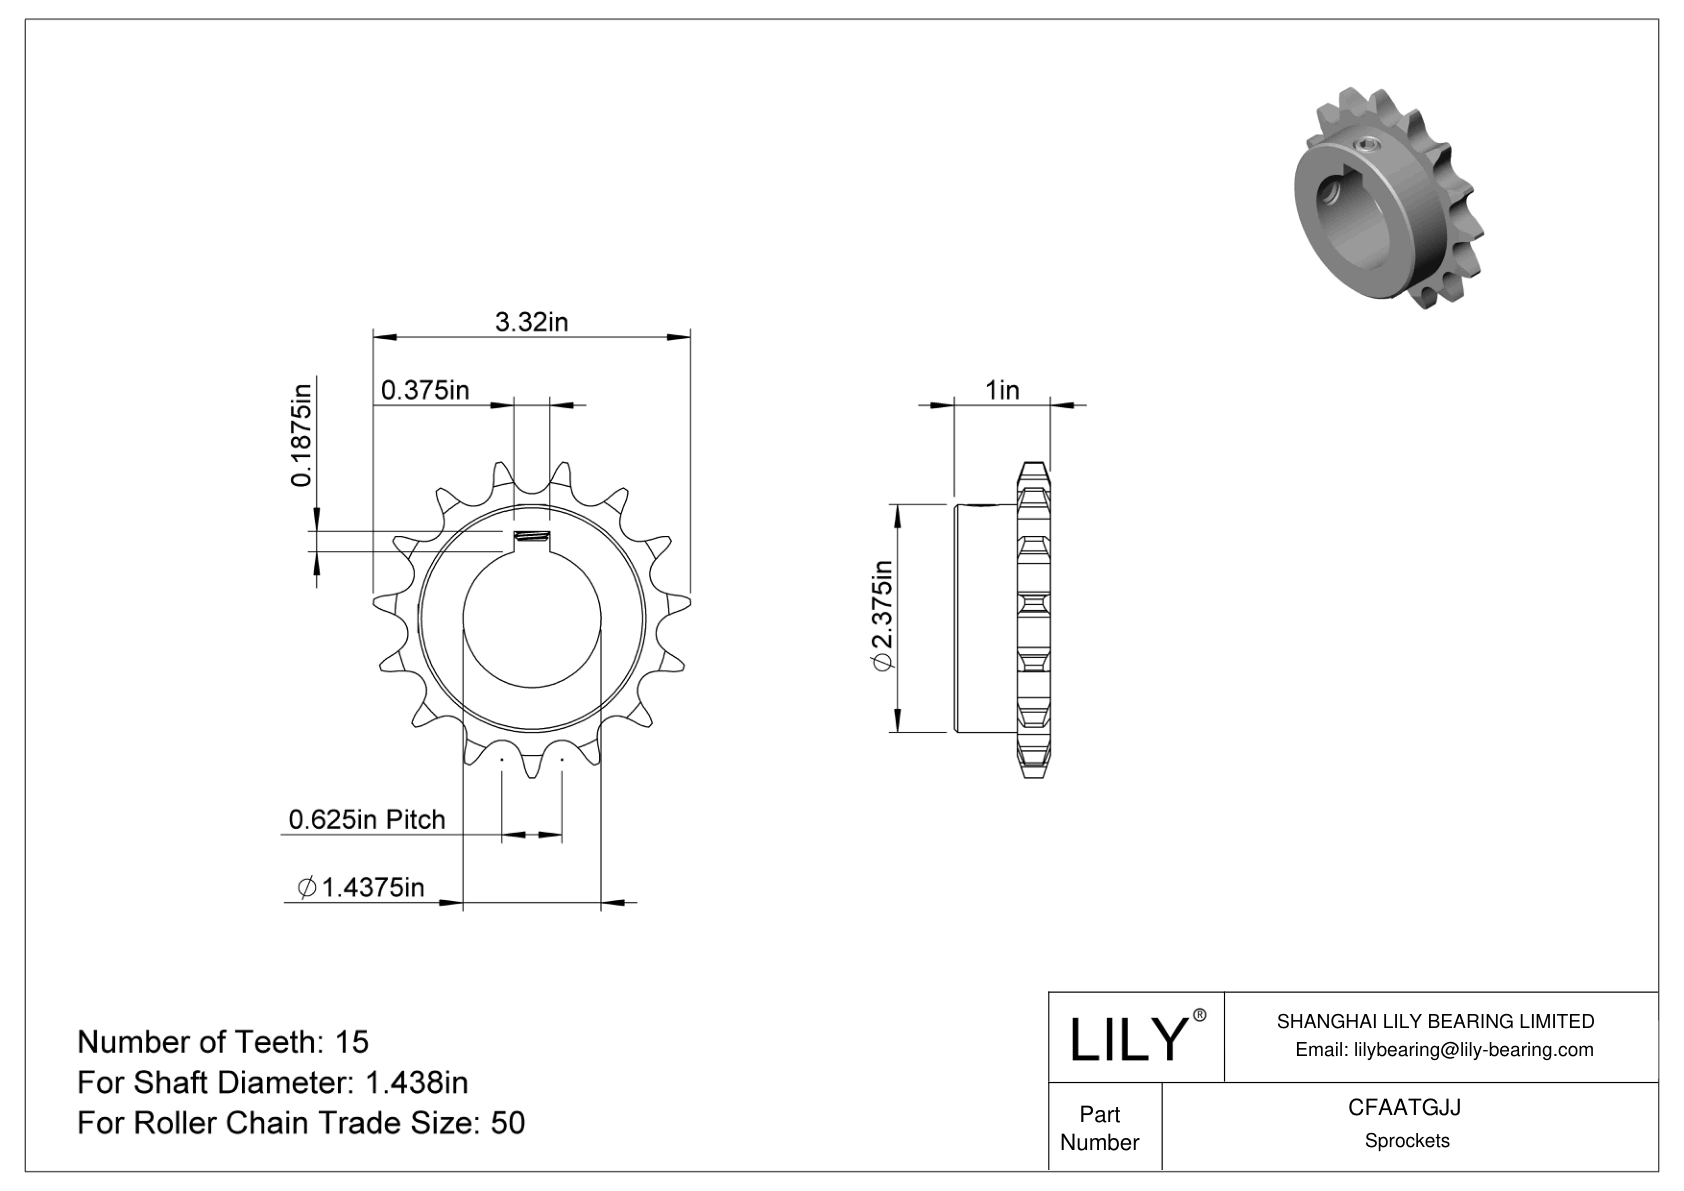 CFAATGJJ Wear-Resistant Sprockets for ANSI Roller Chain cad drawing